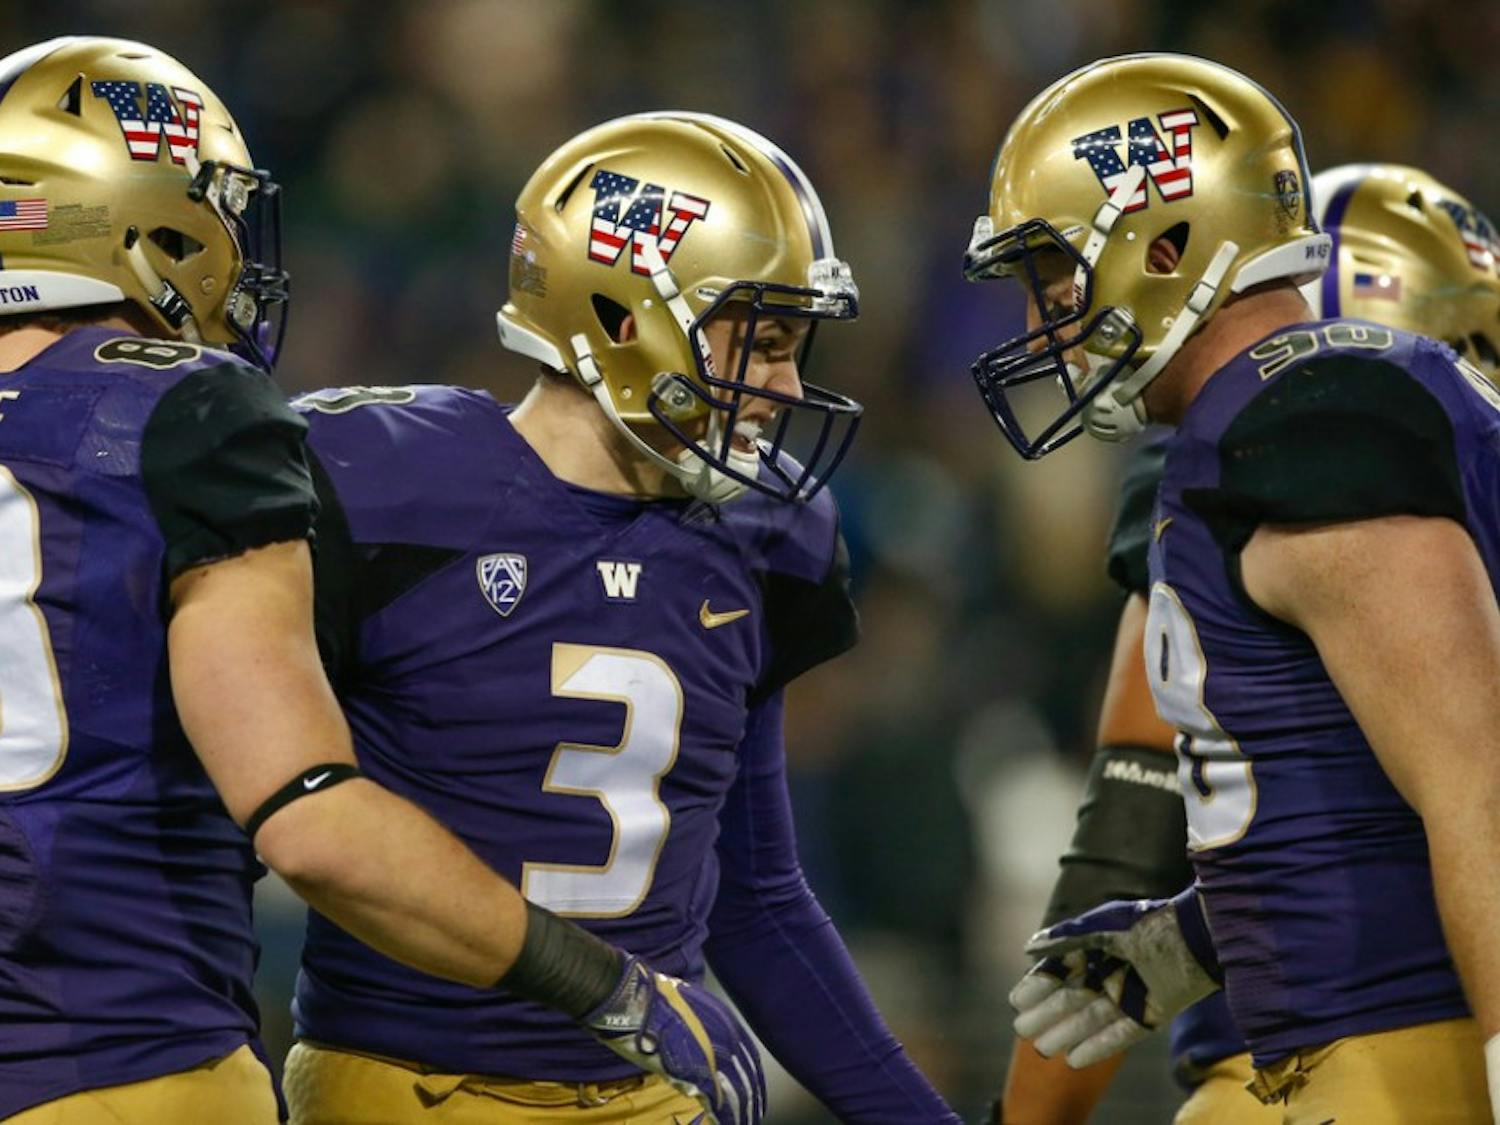 Quarterback Jake Browning #3 of the Washington Huskies is congratulated by tight end Drew Sample #88 and tight end Will Dissly #98 after throwing a touchdown pass to running back Lavon Coleman against the Utah Utes at Husky Stadium on November 18, 2017 in Seattle, Washington. The touchdown pass gave Browning 76 for his career, setting the school record.